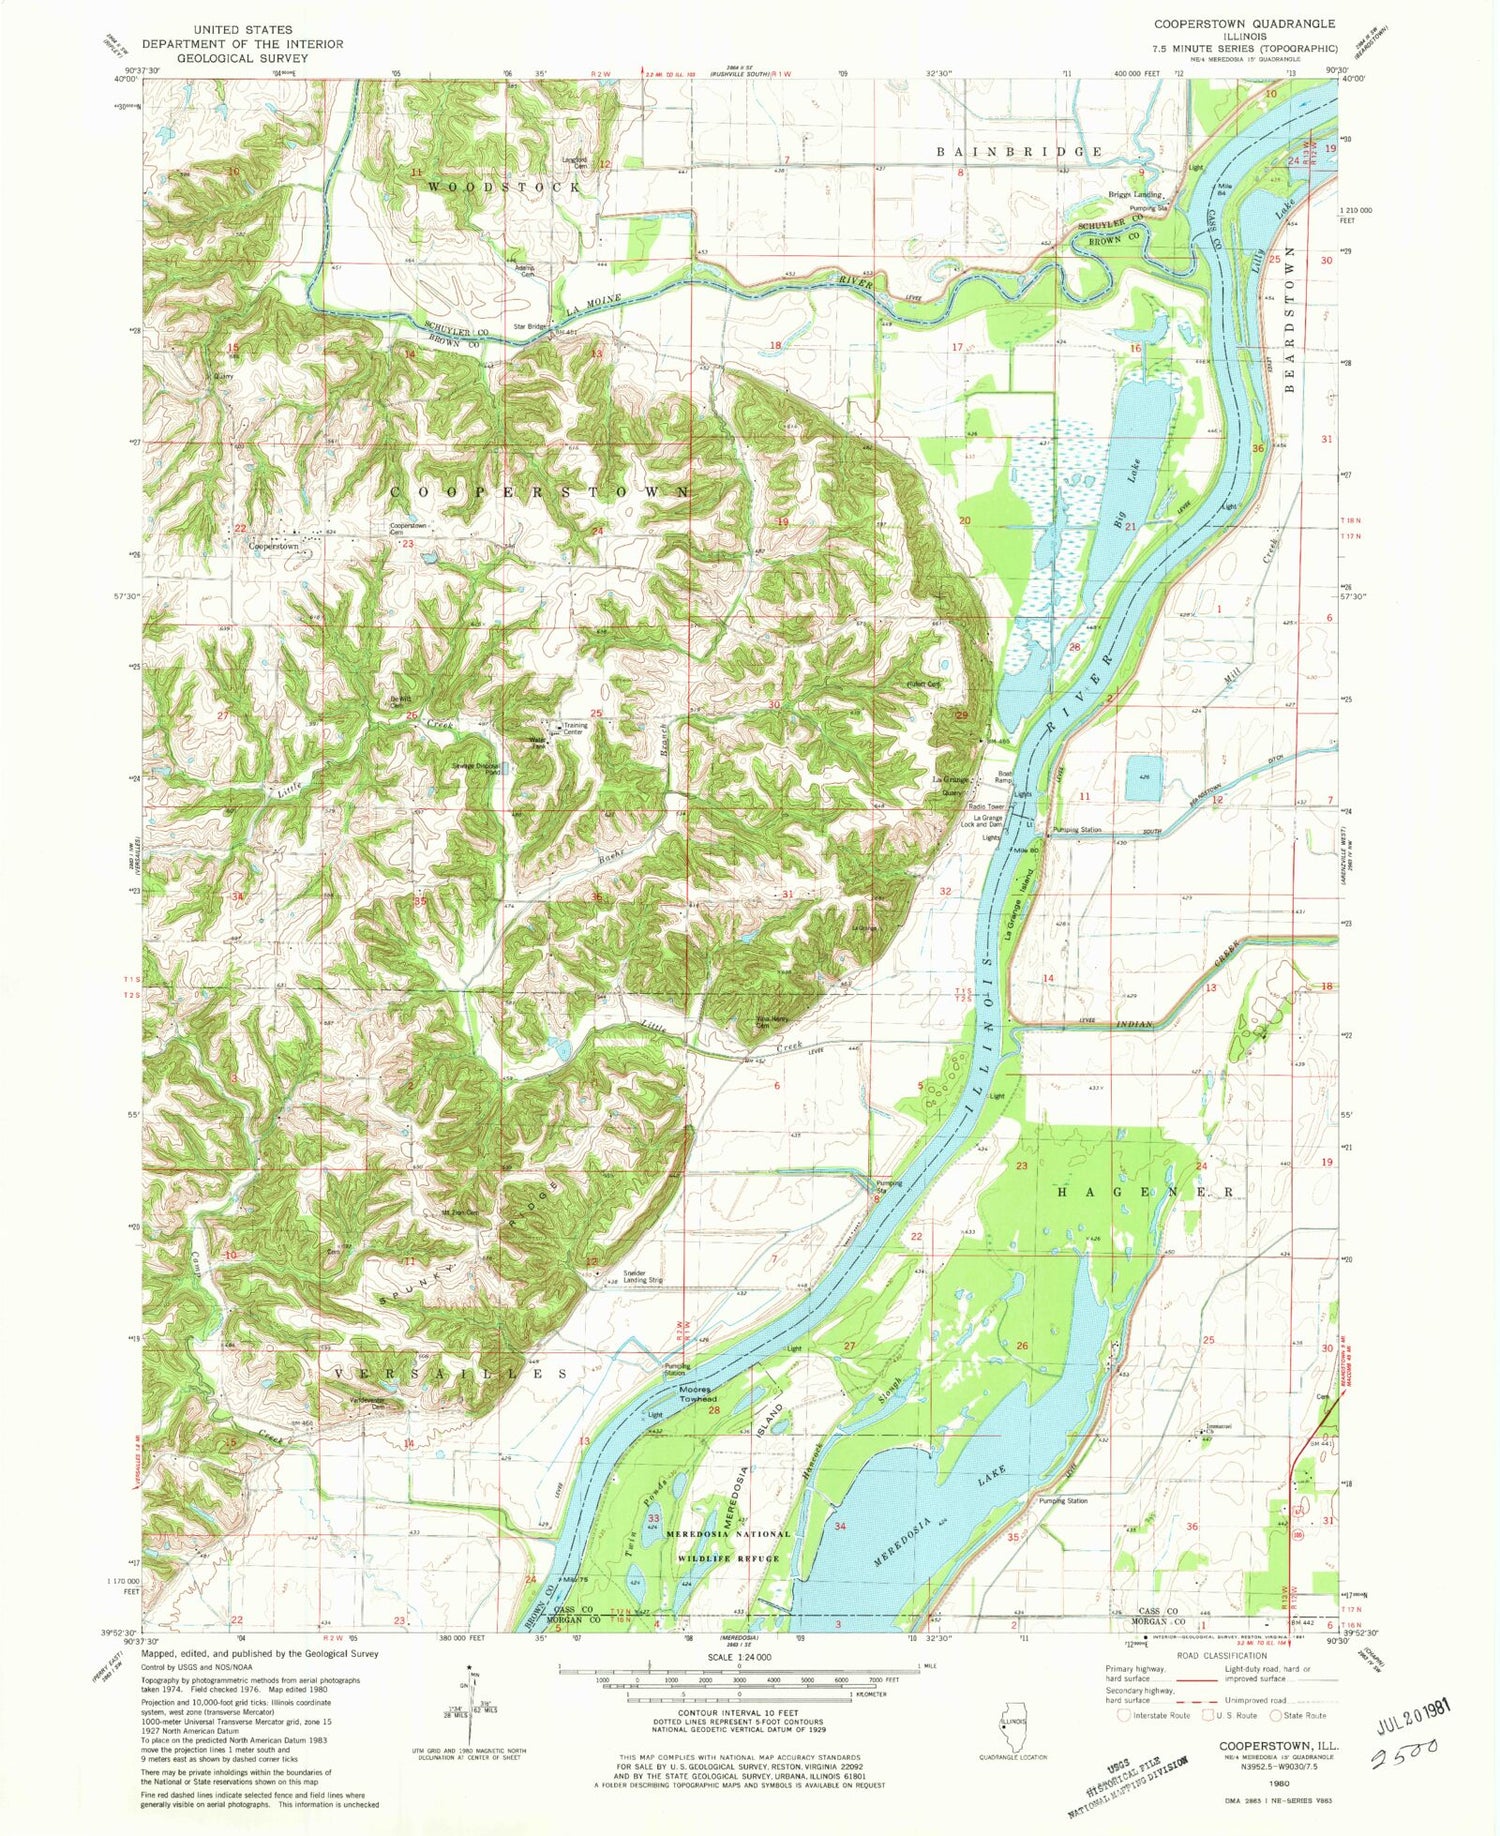 Classic USGS Cooperstown Illinois 7.5'x7.5' Topo Map Image